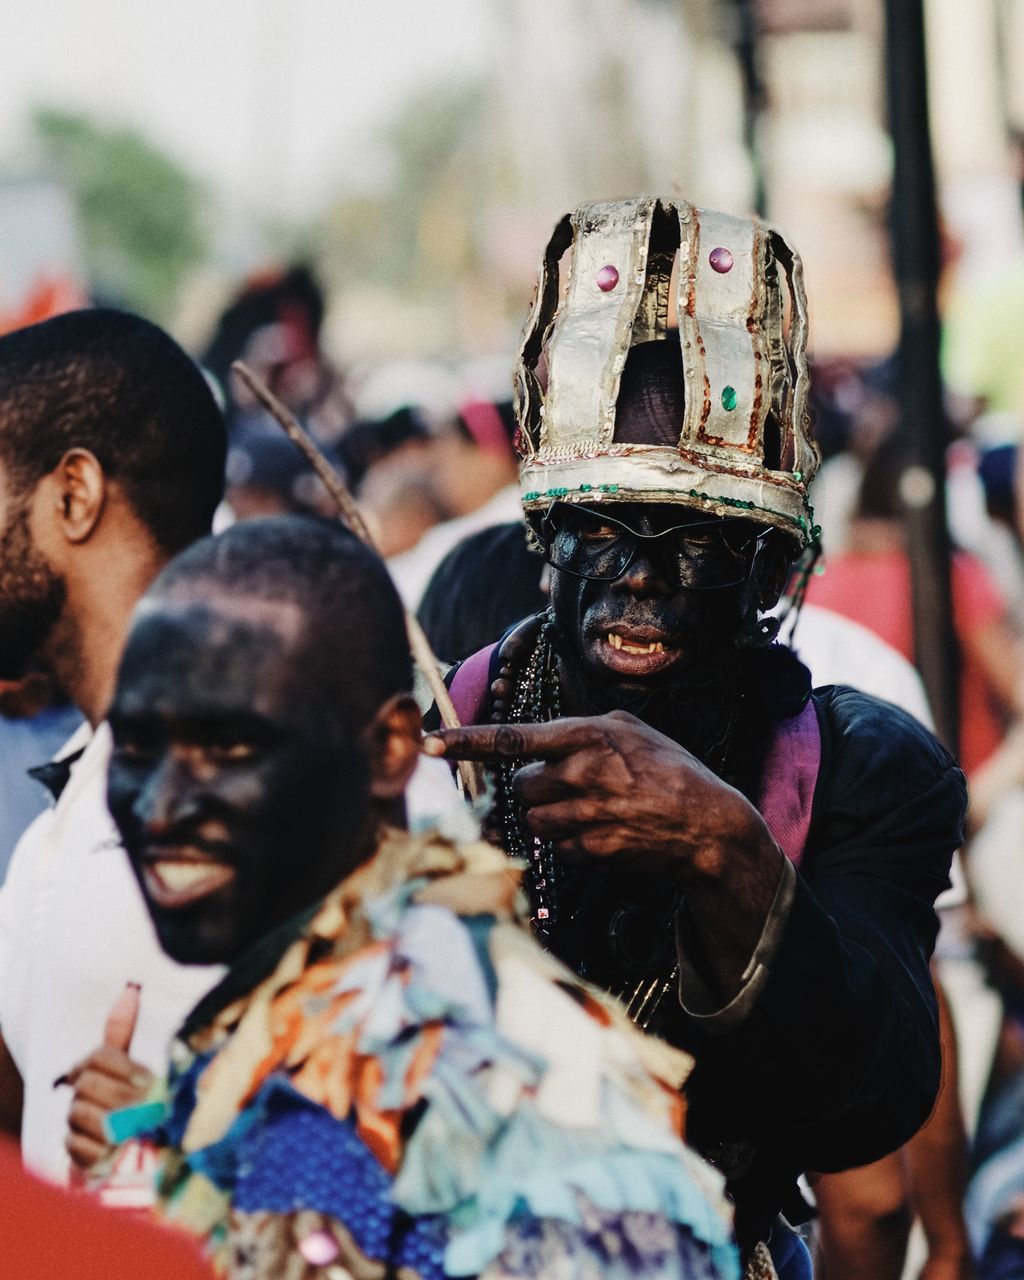 real people, men, lifestyles, people, celebration, leisure activity, incidental people, focus on foreground, portrait, arts culture and entertainment, day, clothing, outdoors, group of people, headshot, costume, disguise, festival, carnival - celebration event